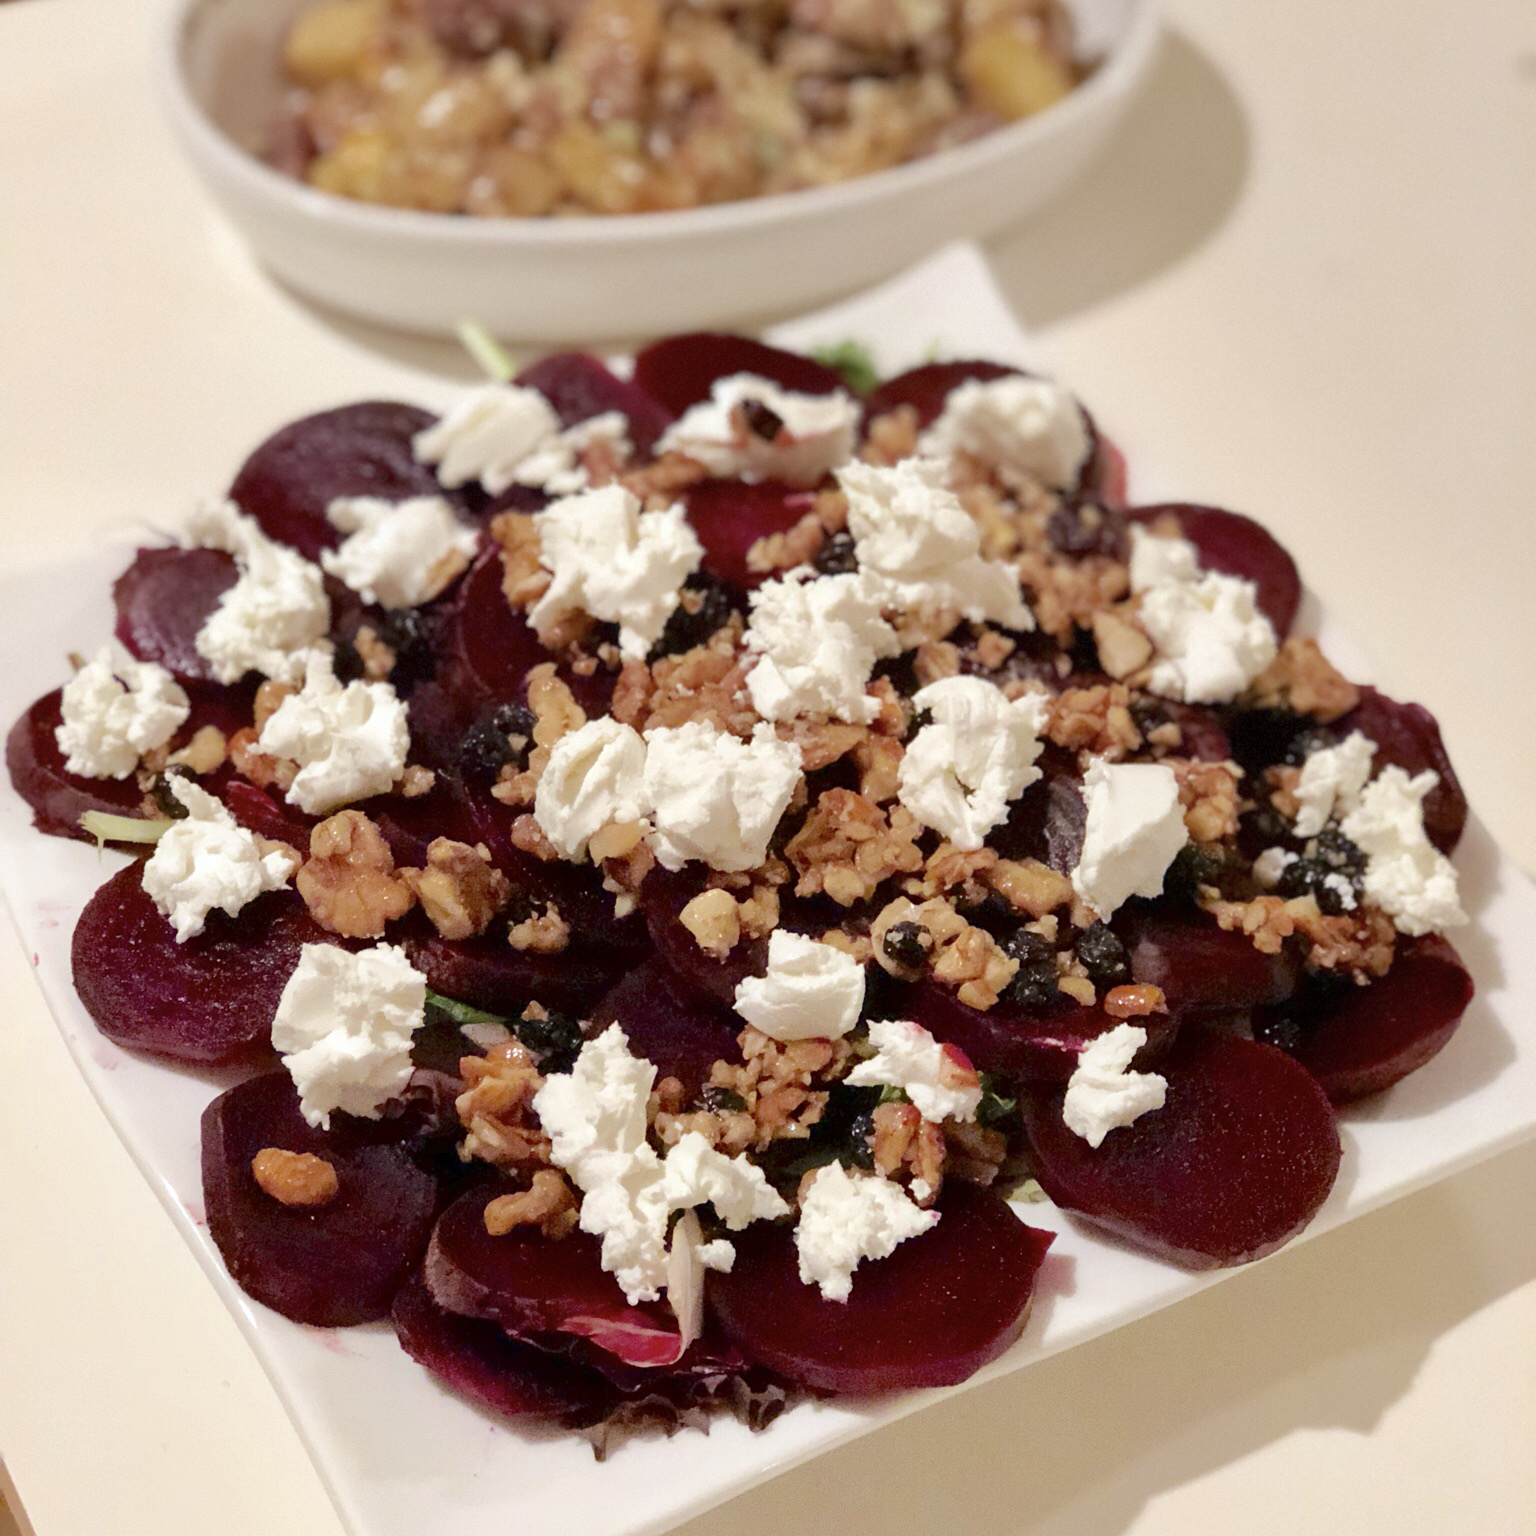 Beet Salad with Goat Cheese 